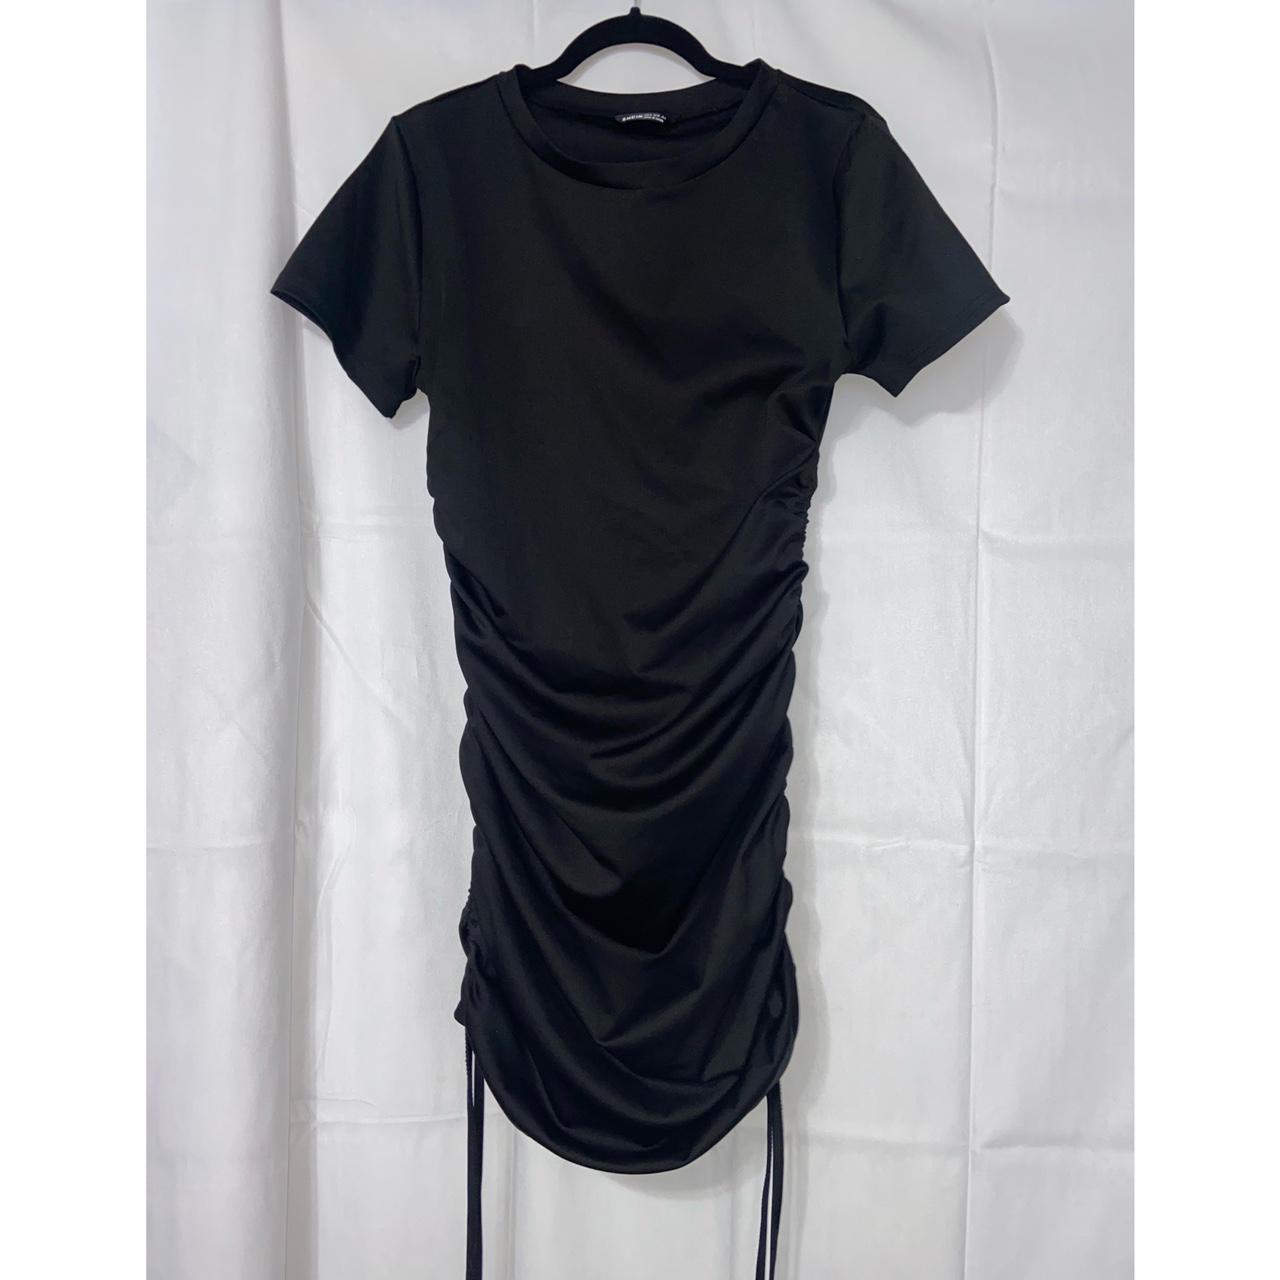 Black bodycon dress with ties on either side #shein... - Depop